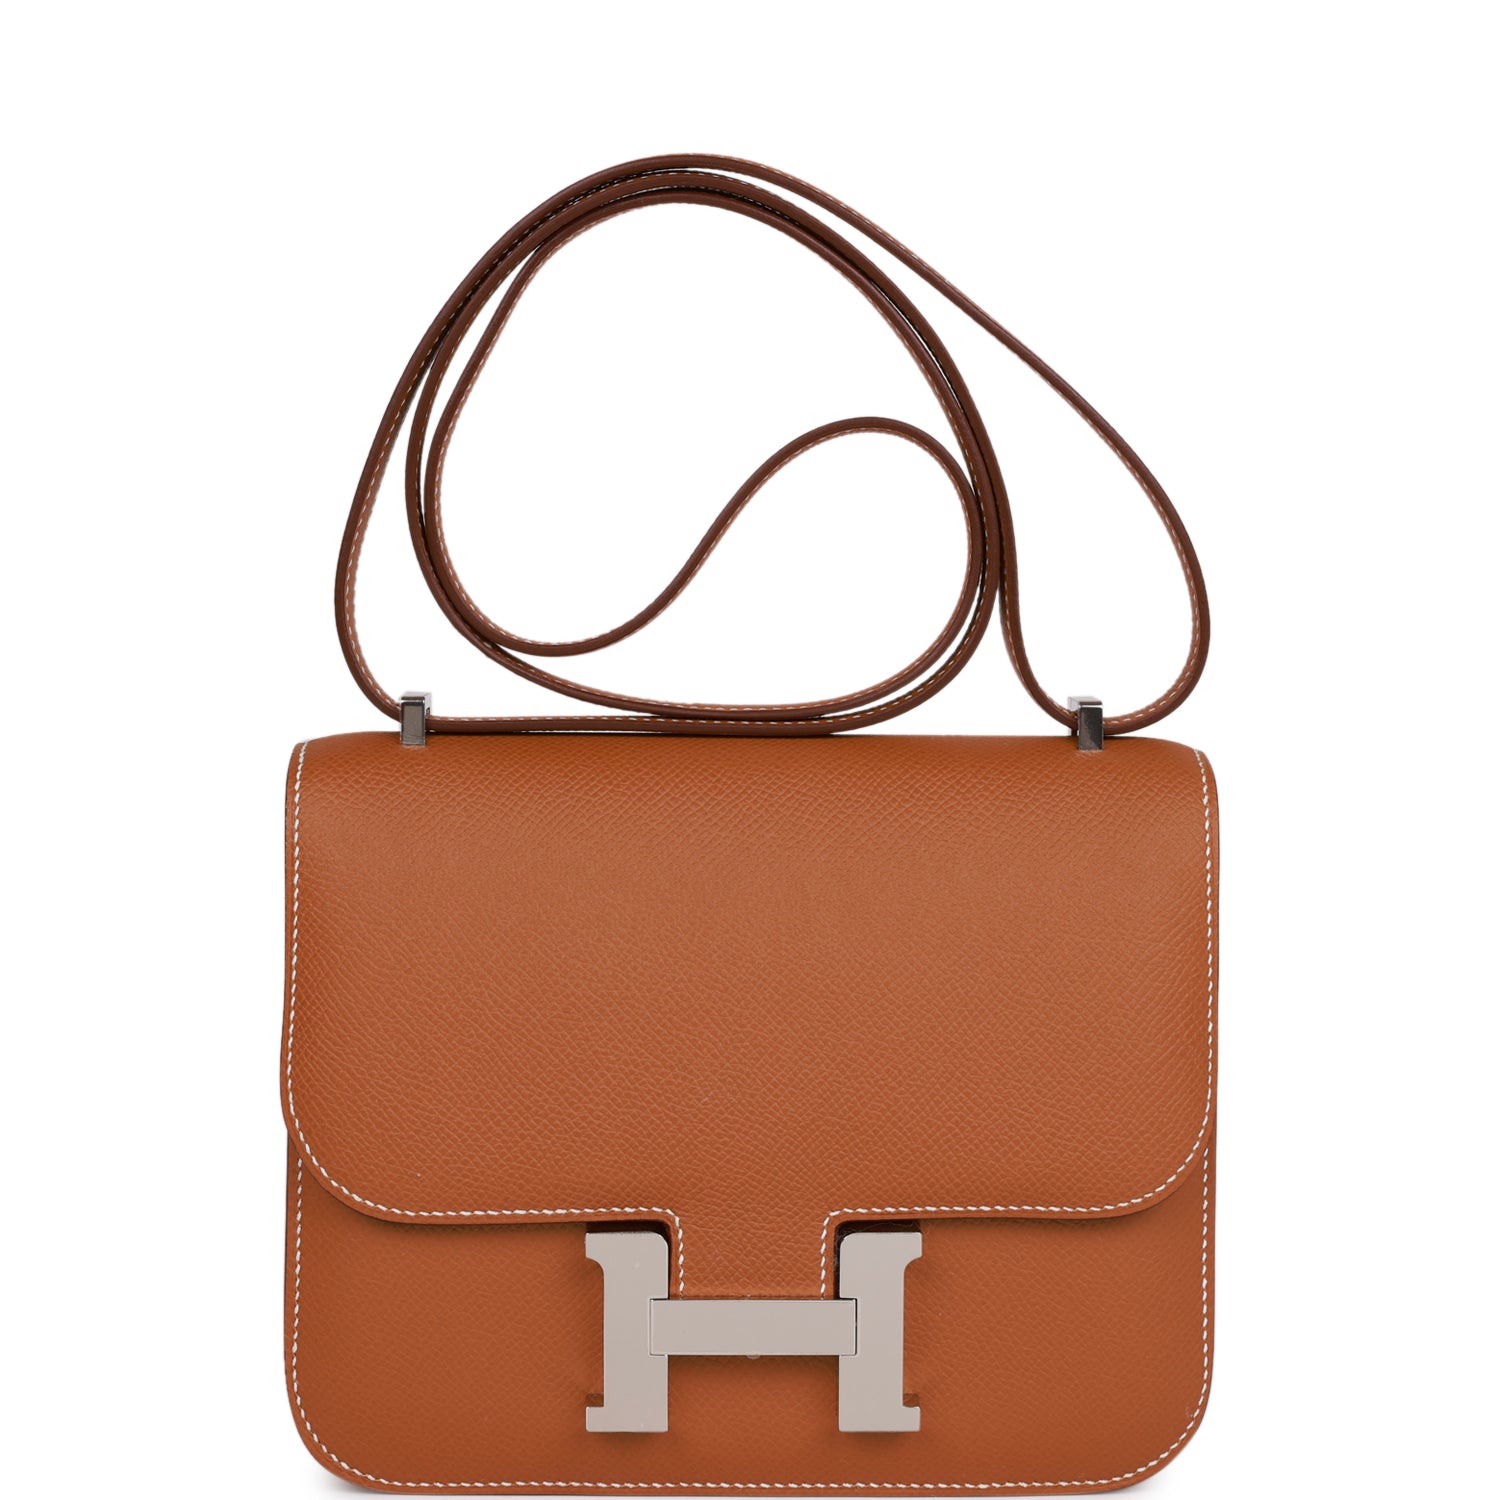 How much can a hermes constance bag cost?